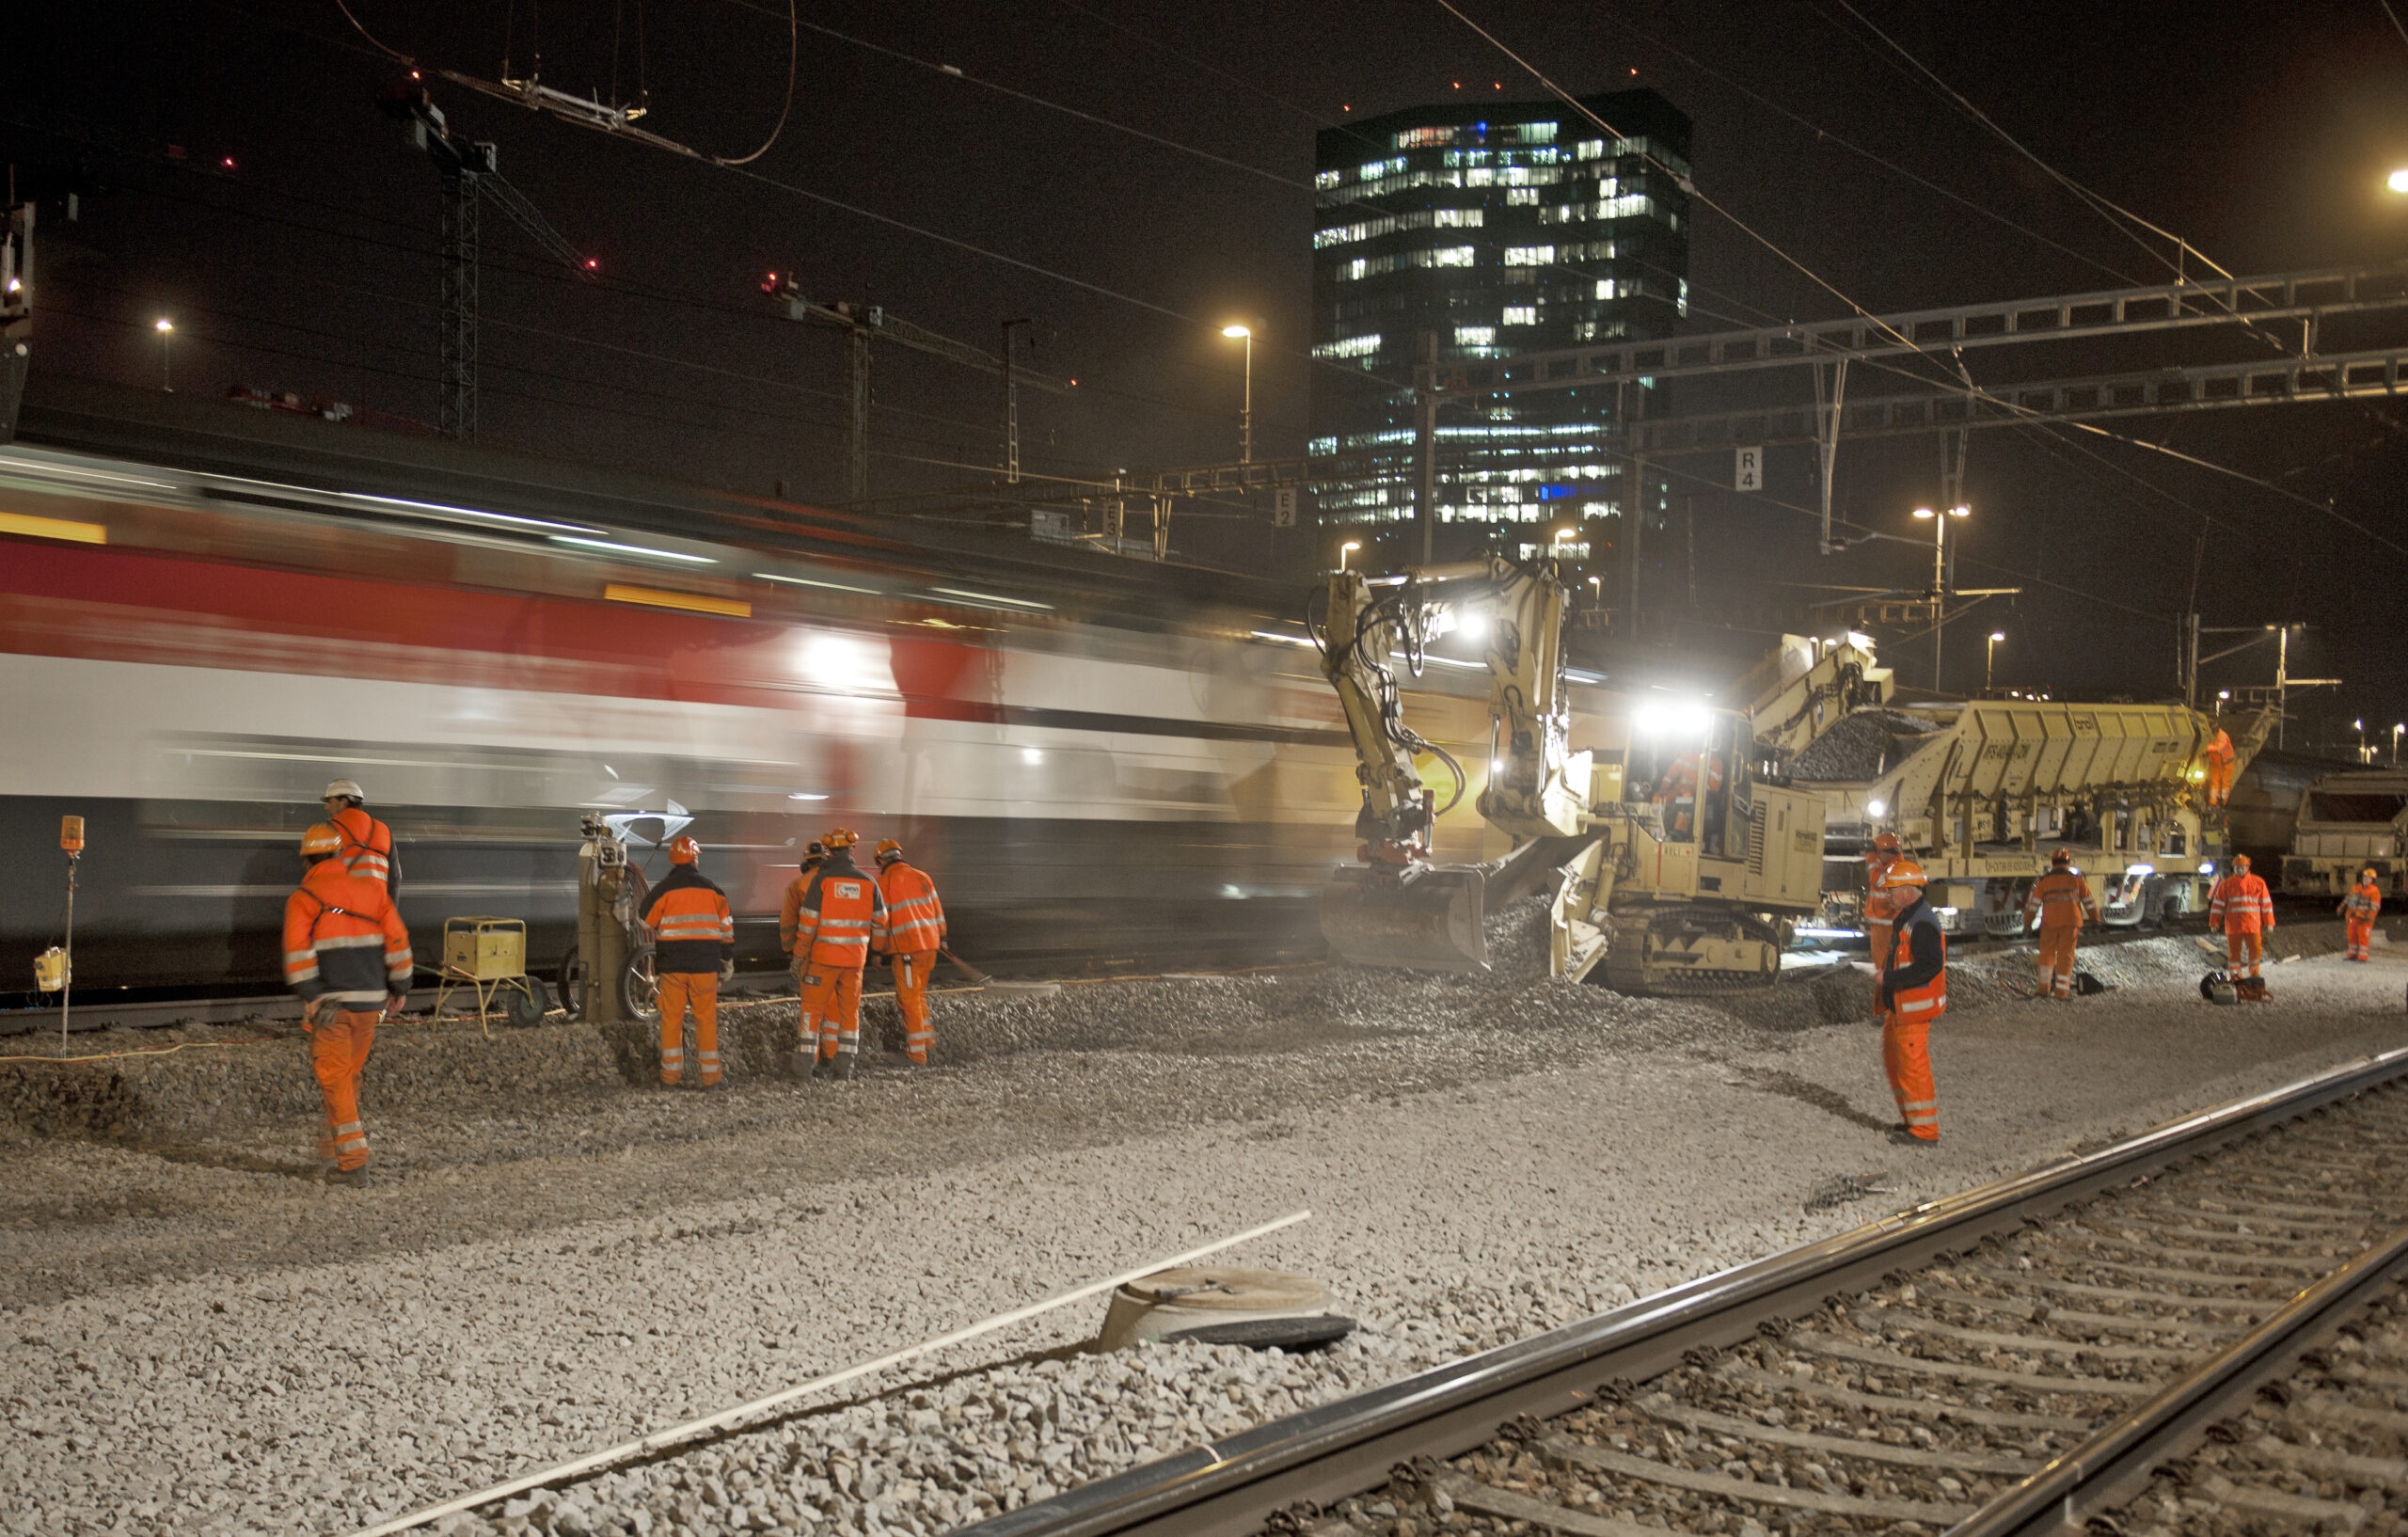 Engineering work under operation for the Zurich Cross-City Link project